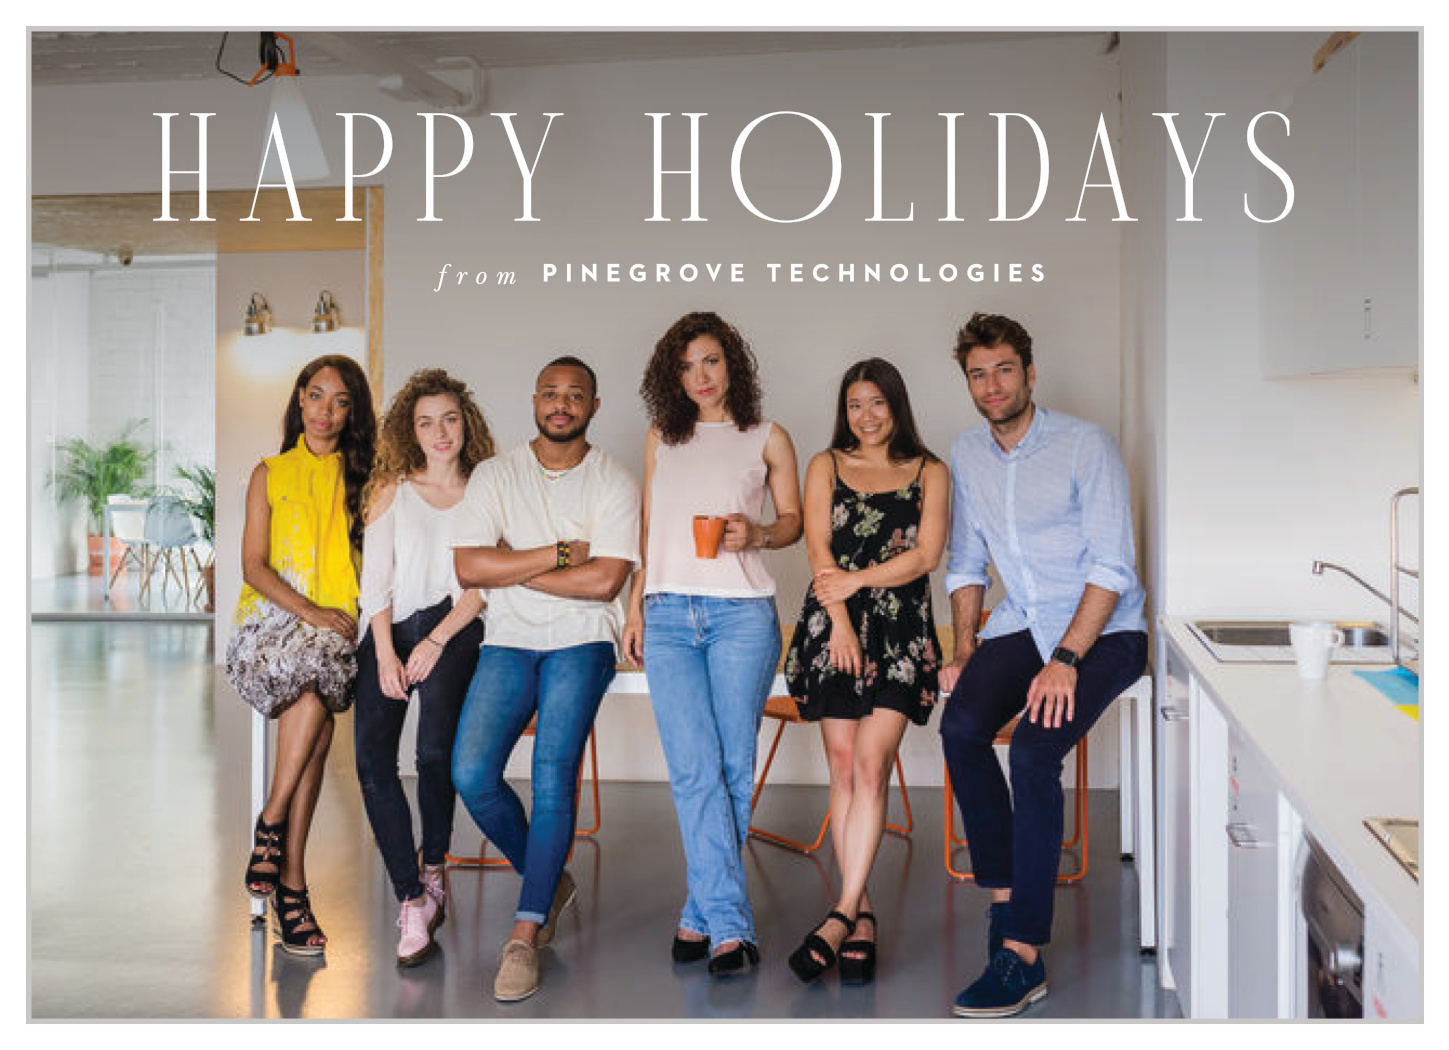 Full Photo Corporate Holiday Cards